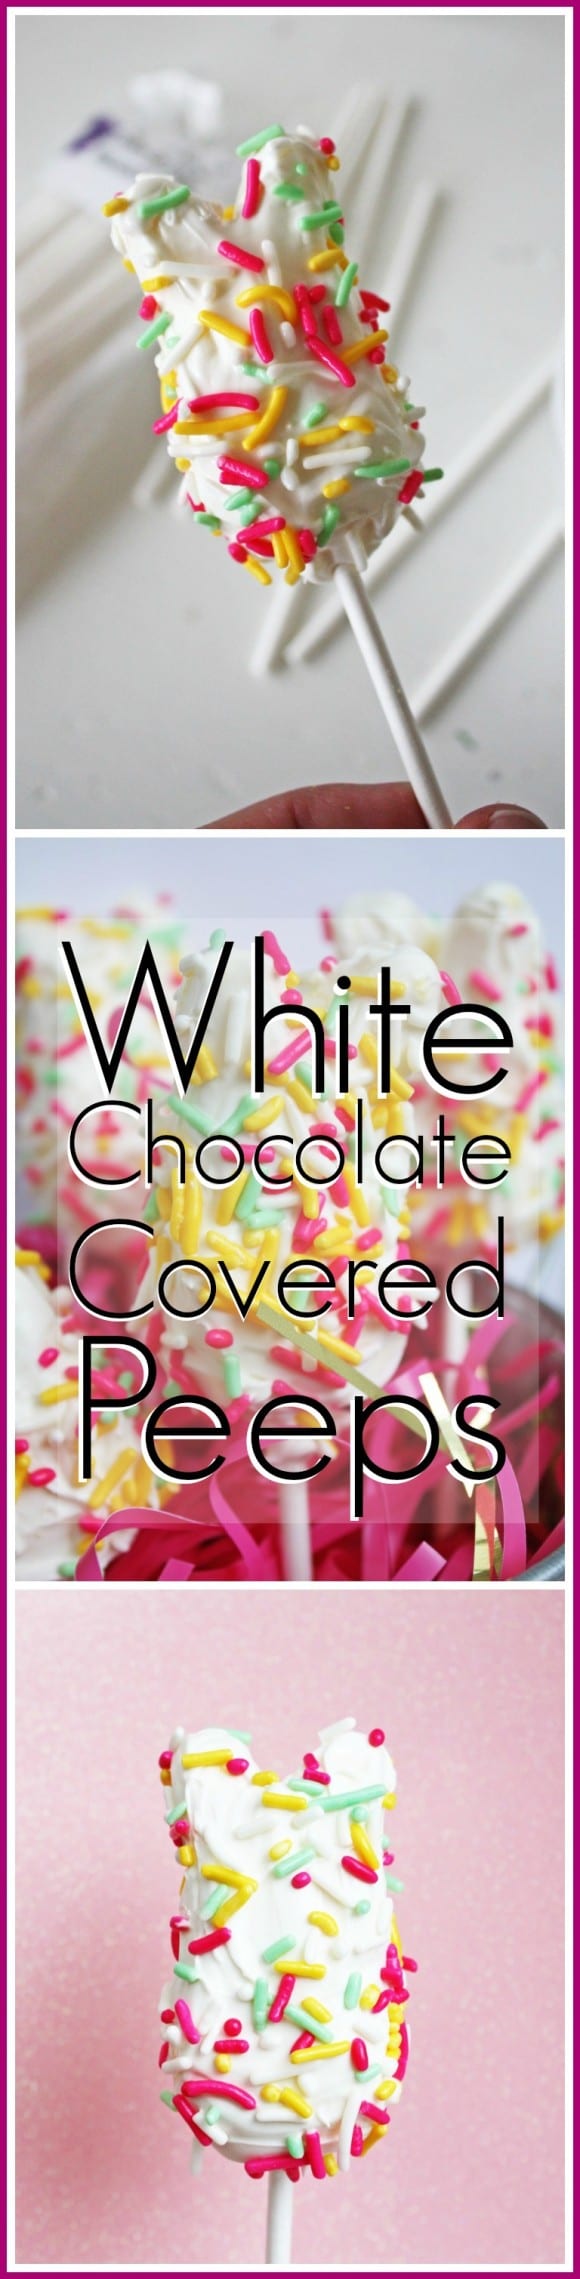 Easy White Chocolate Peeps Craft for Easter! | CatchMyParty.com